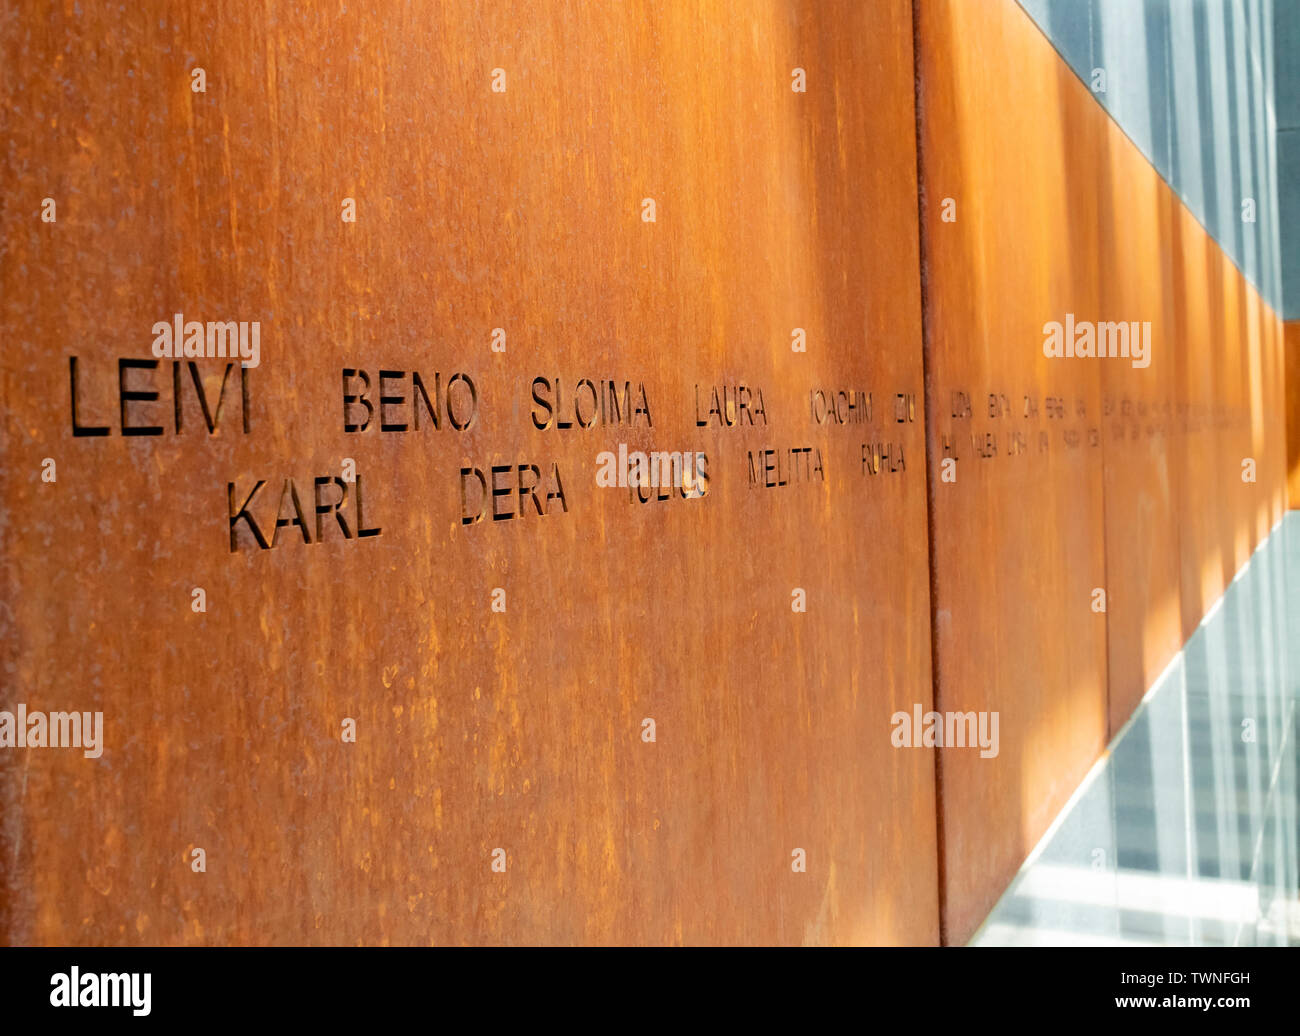 Bucharest, Romania - August 13th, 2018: Victims names written on rusty metal walls in the holocaust memorial in Bucharest, Romania Stock Photo